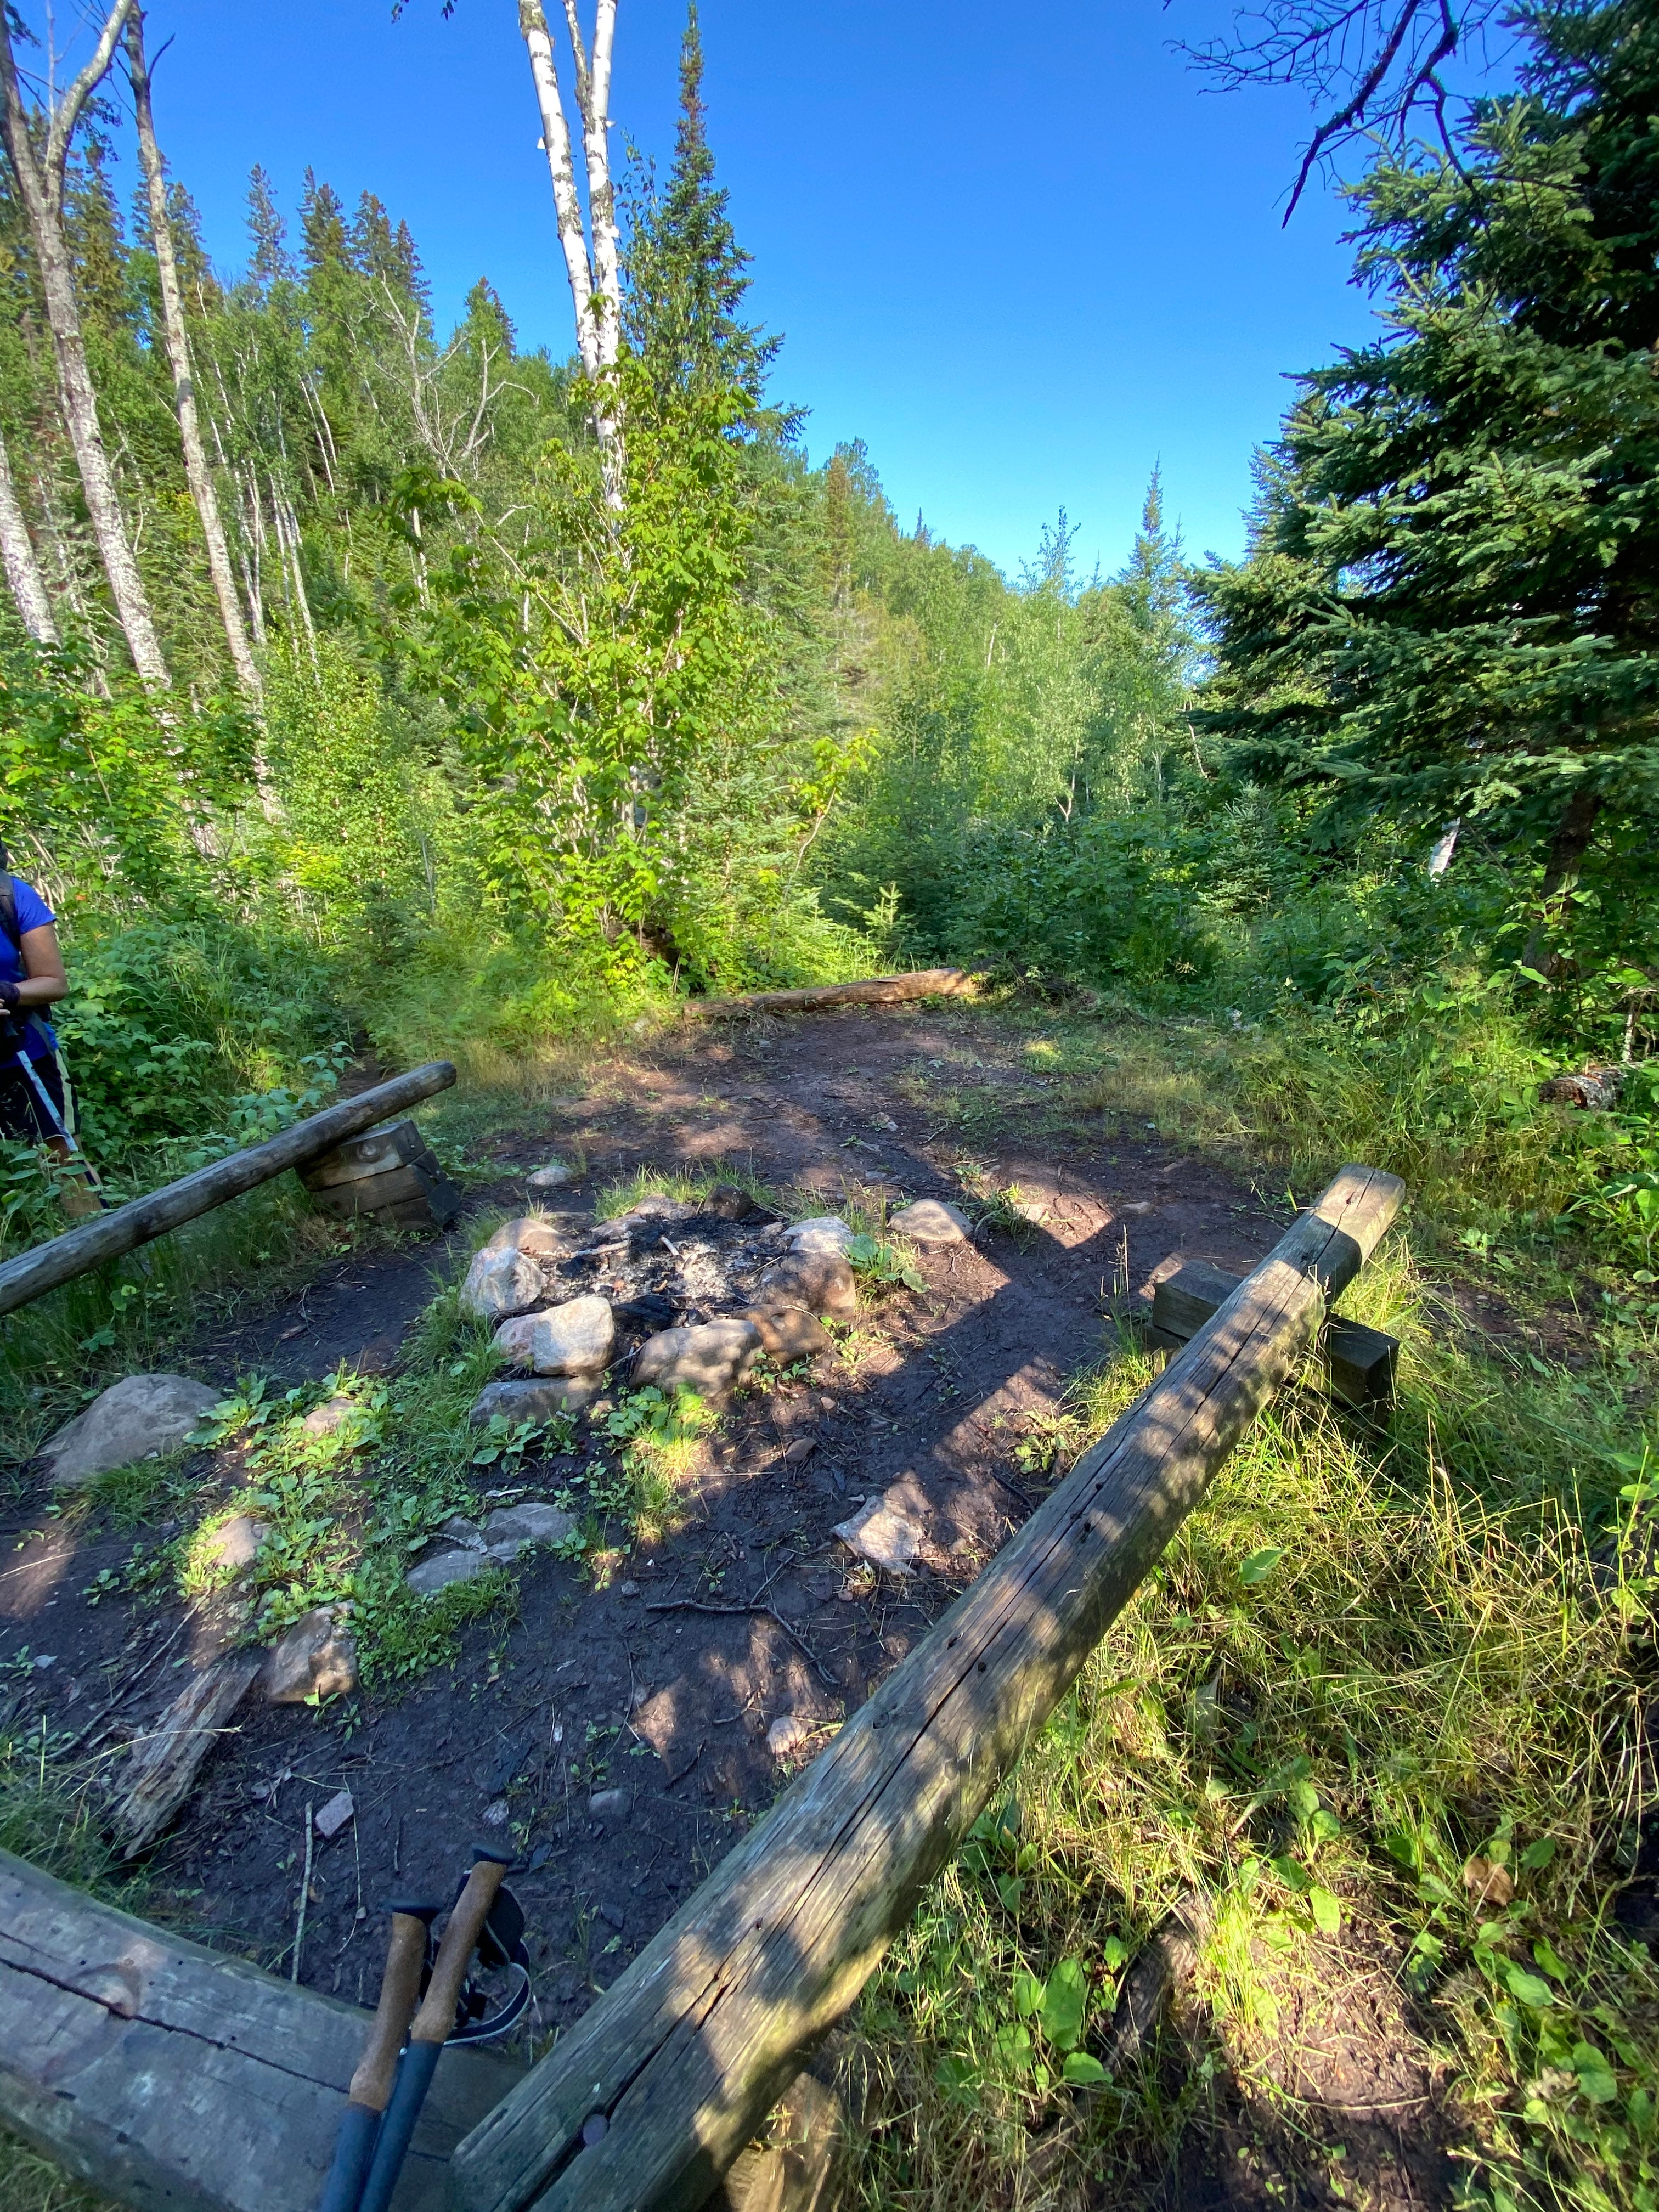 Camper submitted image from Camp Creek (formerly Indian Camp Creek), Superior Hiking Trail - 5